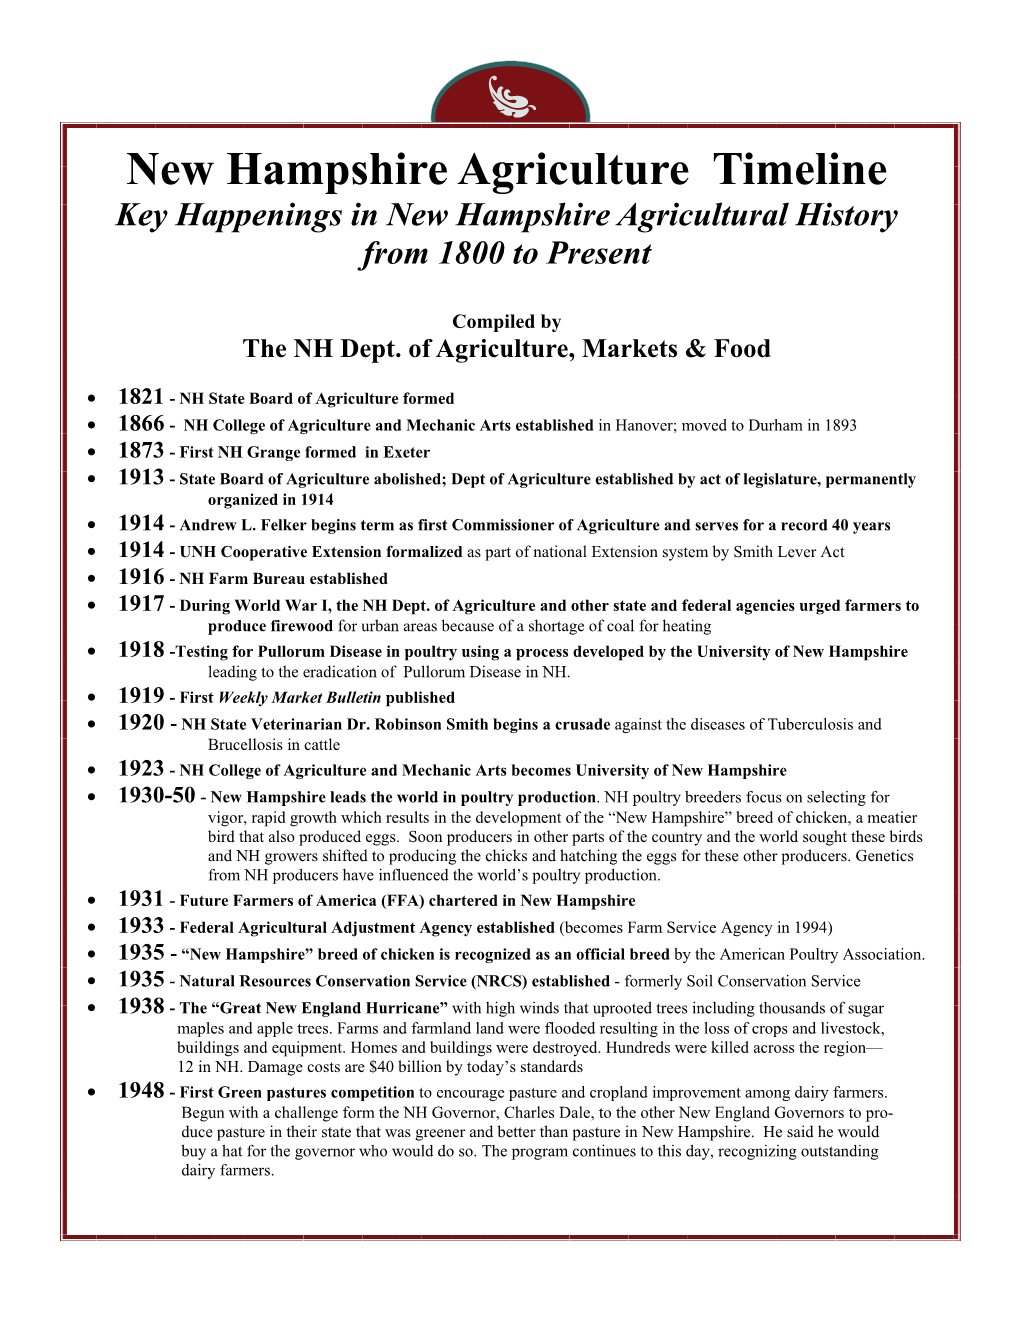 New Hampshire Agriculture Timeline Key Happenings in New Hampshire Agricultural History from 1800 to Present